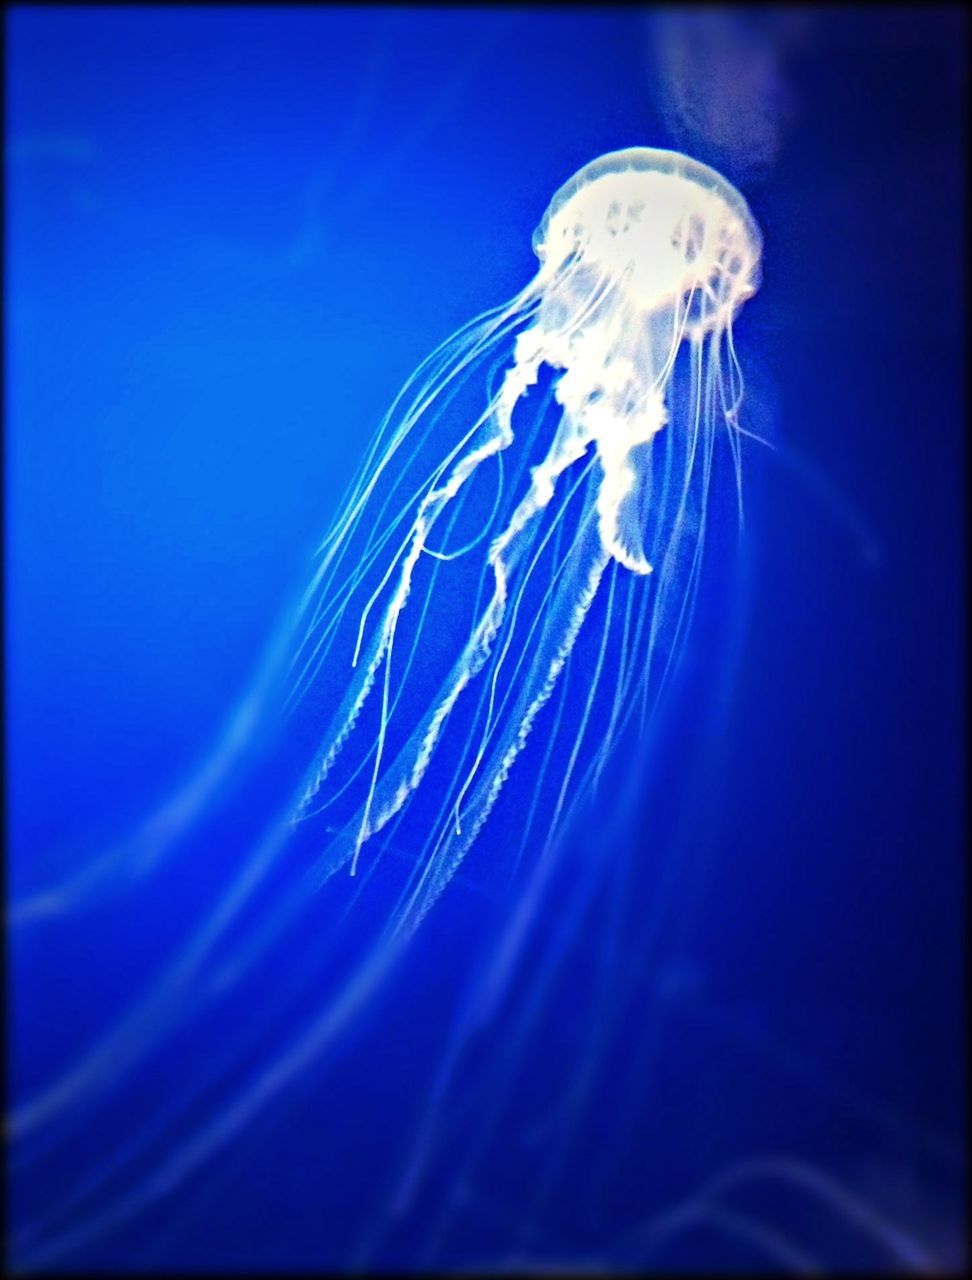 underwater, animal themes, blue, water, one animal, swimming, wildlife, animals in the wild, sea life, undersea, jellyfish, motion, close-up, sea, fish, nature, studio shot, beauty in nature, auto post production filter, aquarium